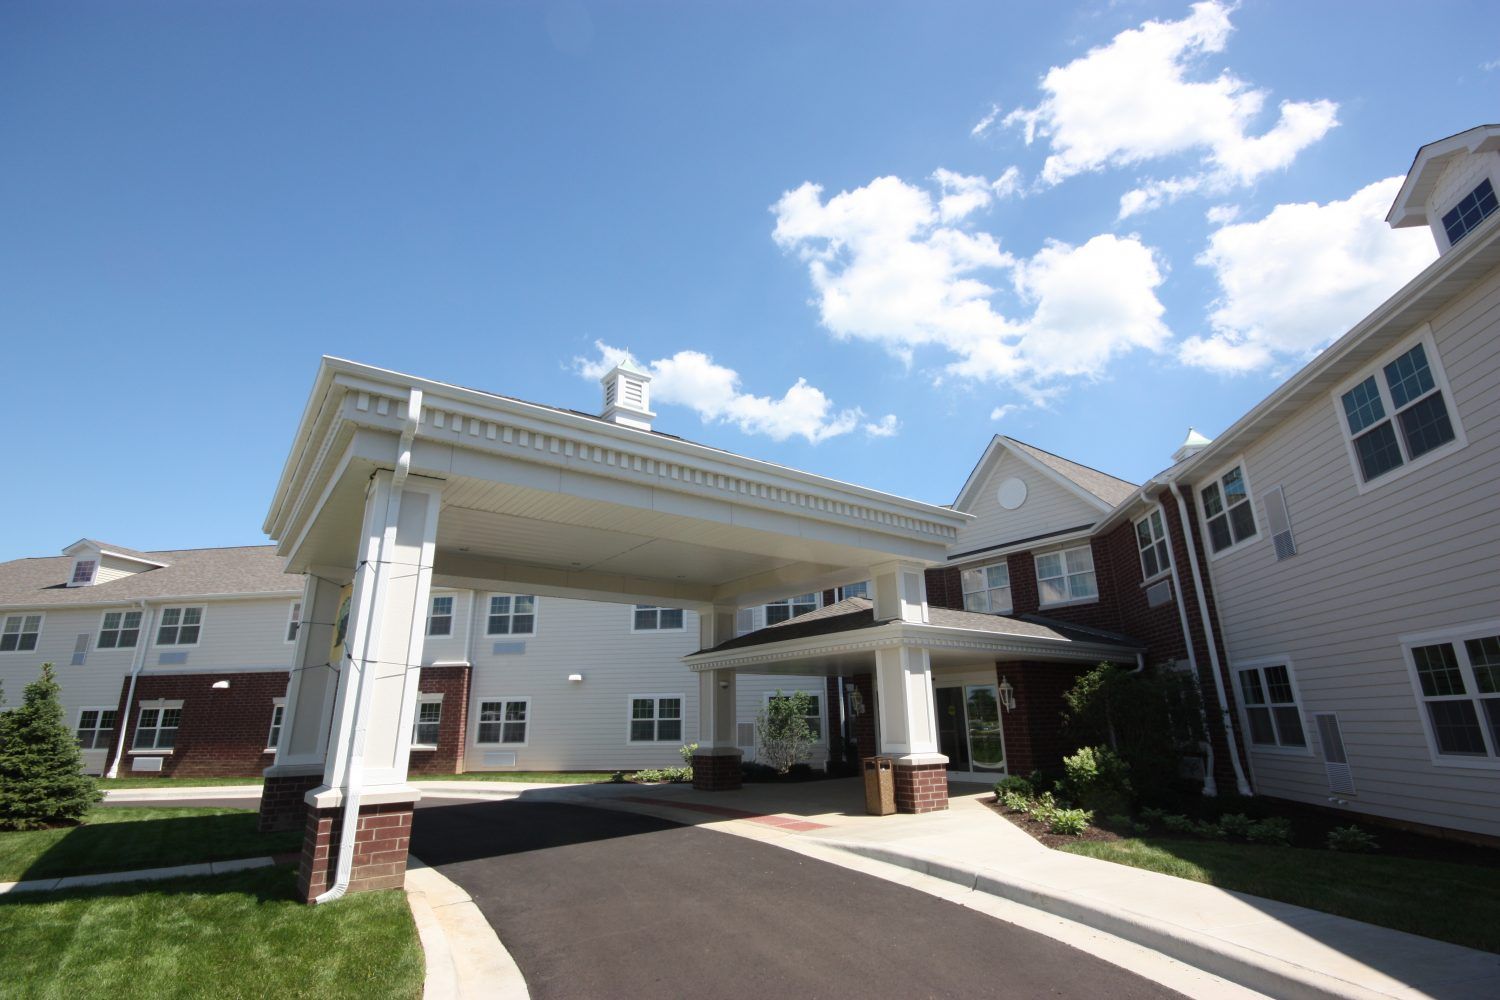 Heritage Woods of Freeport senior living community featuring modern architecture and housing.